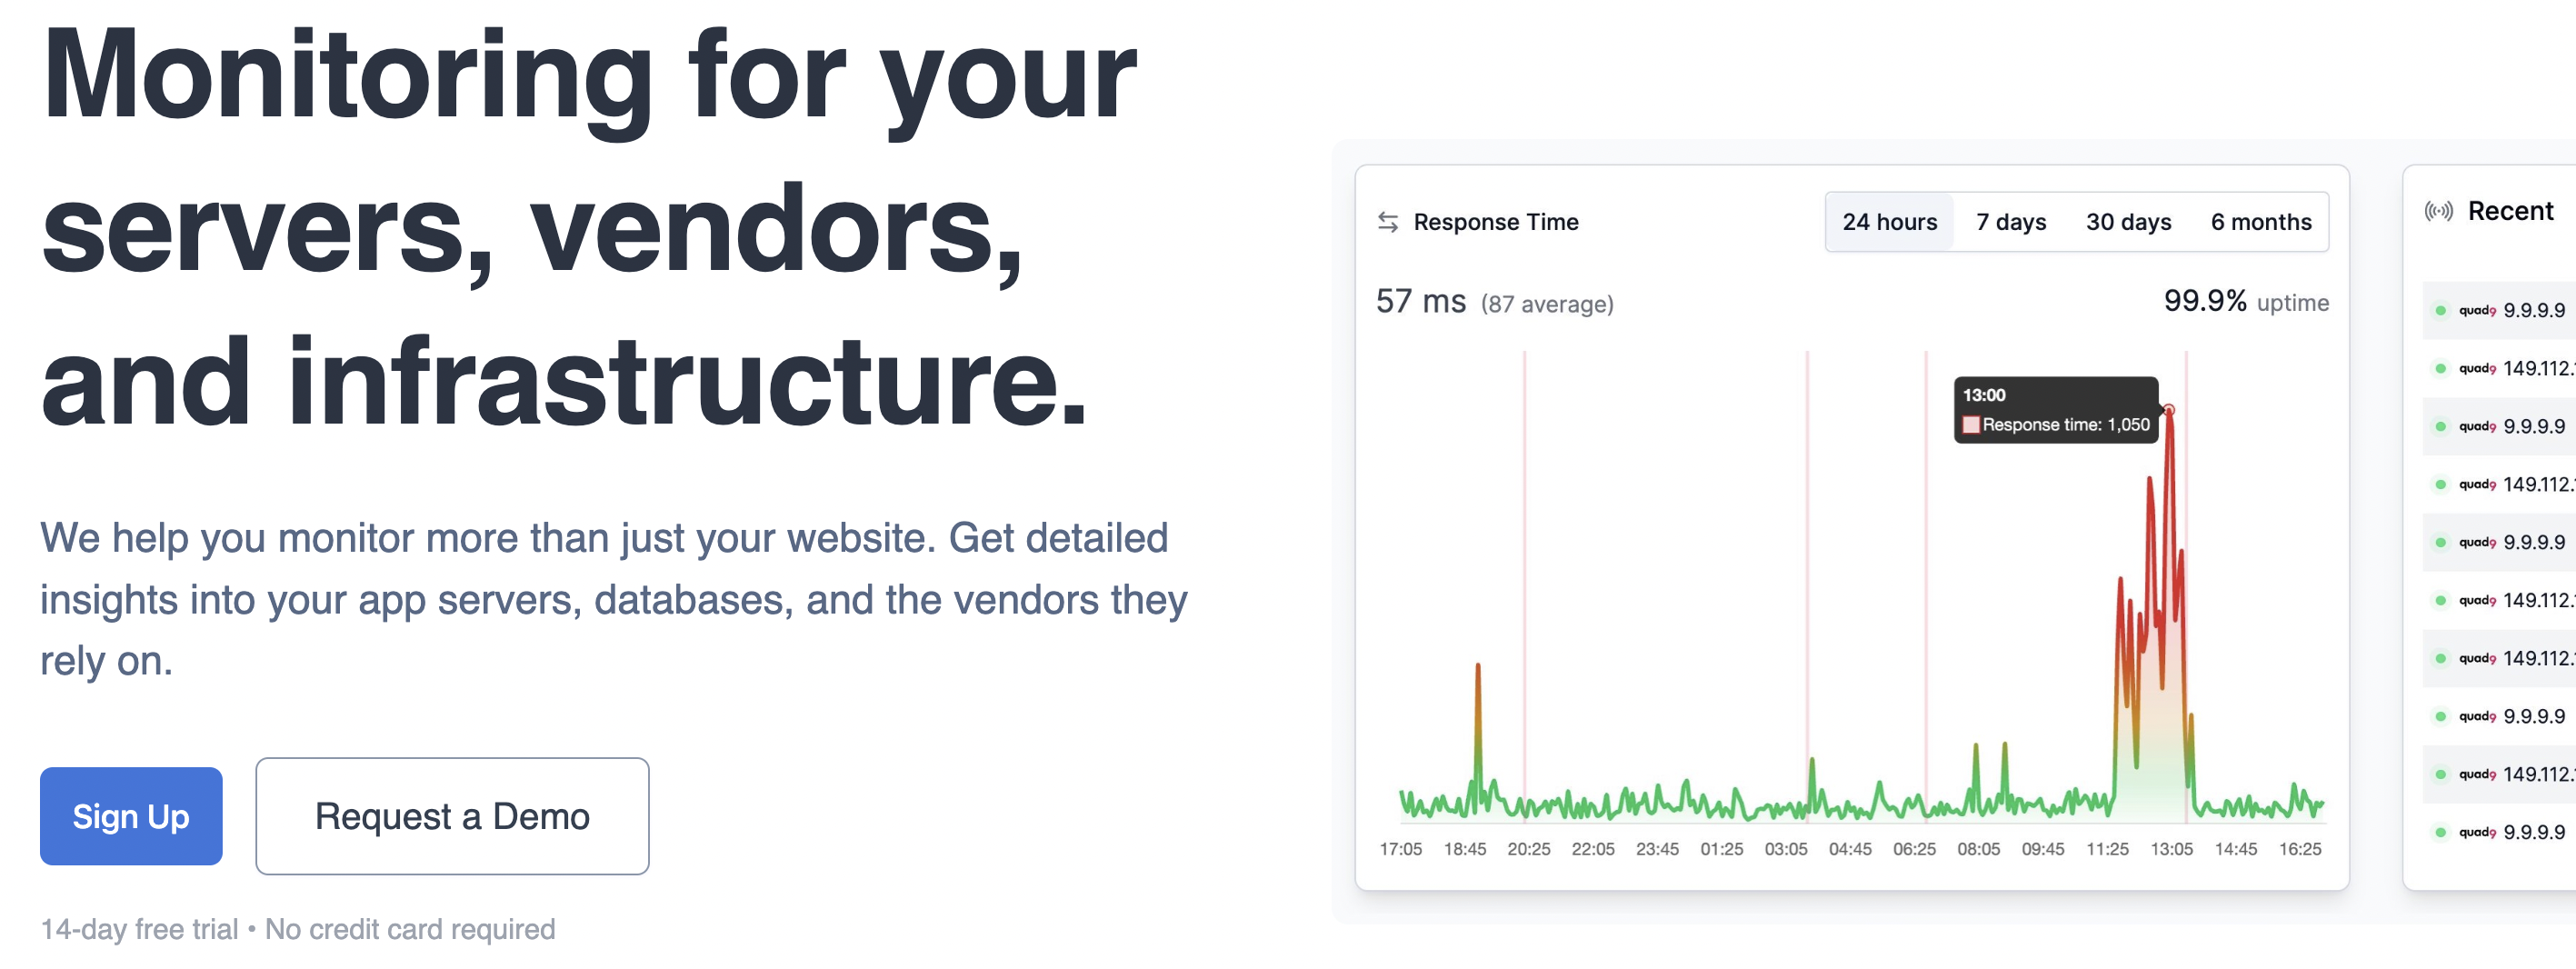 Monitoring for your servers, vendors, and infrastructure.